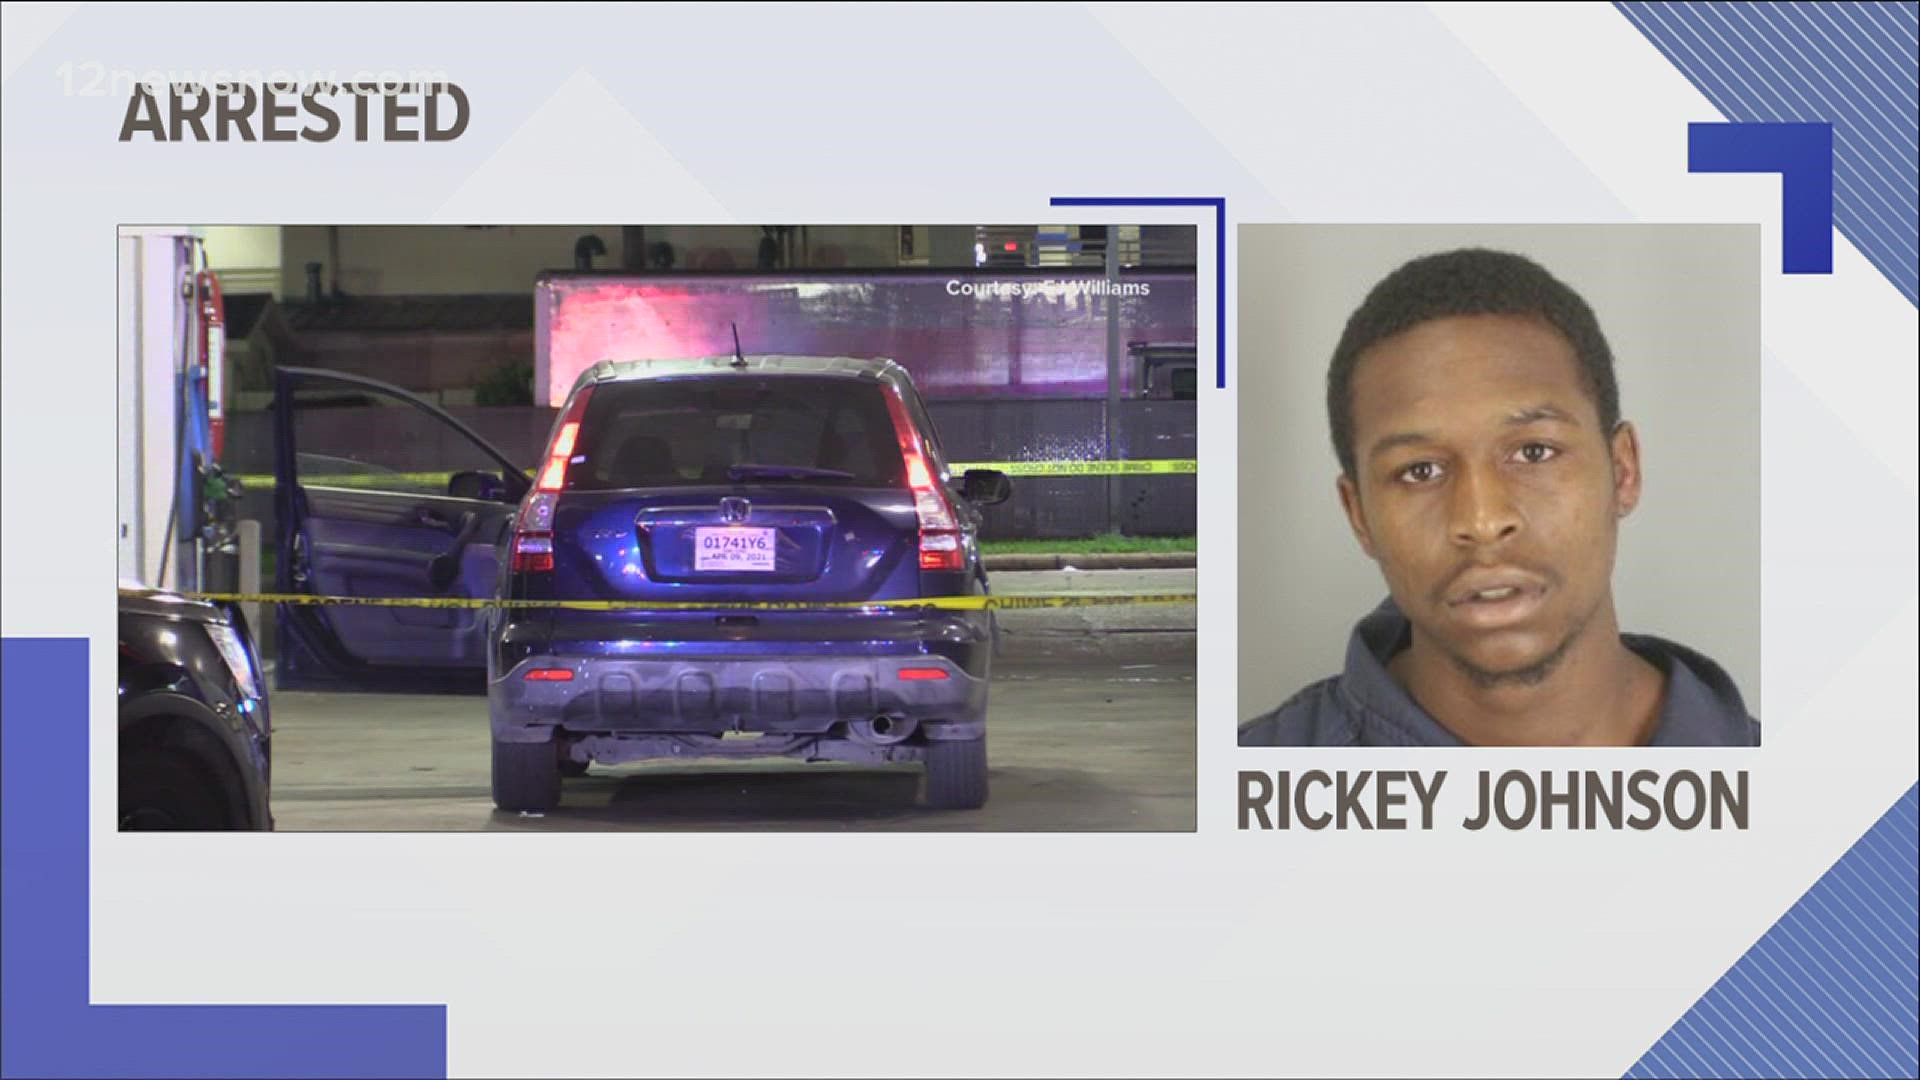 Rickey Johnson is accused of fatally shooting Korey Green and injuring a 23-year-old female.